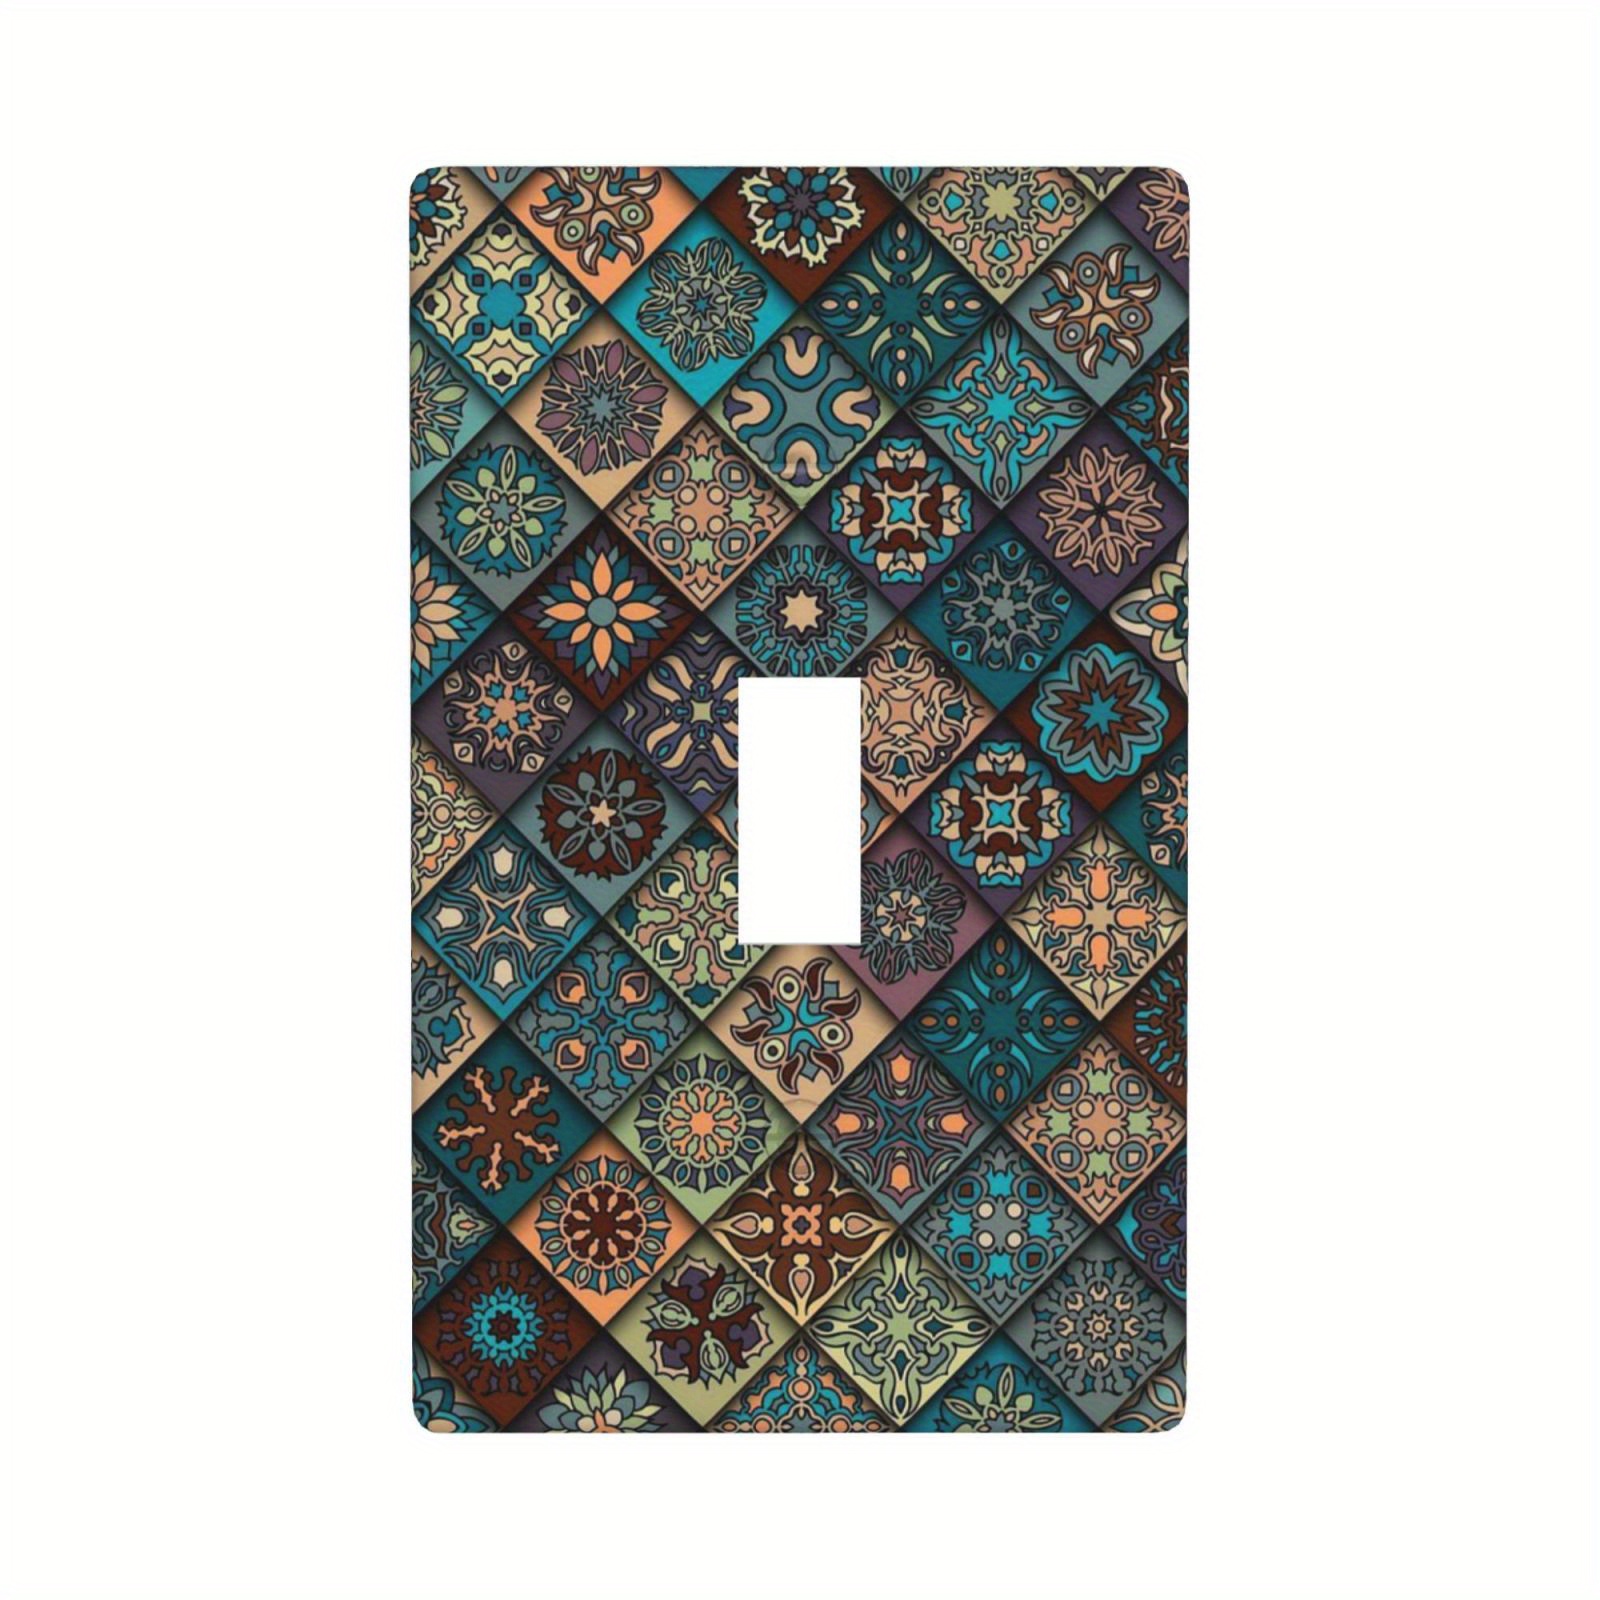 Blue Mexican Tile Pattern Quad Toggle Light Switch Cover 4 Gang Decorative  Wall Plate for Bedroom Office Kitchen Accessories Room Decor Faceplate 8 X  4.50 